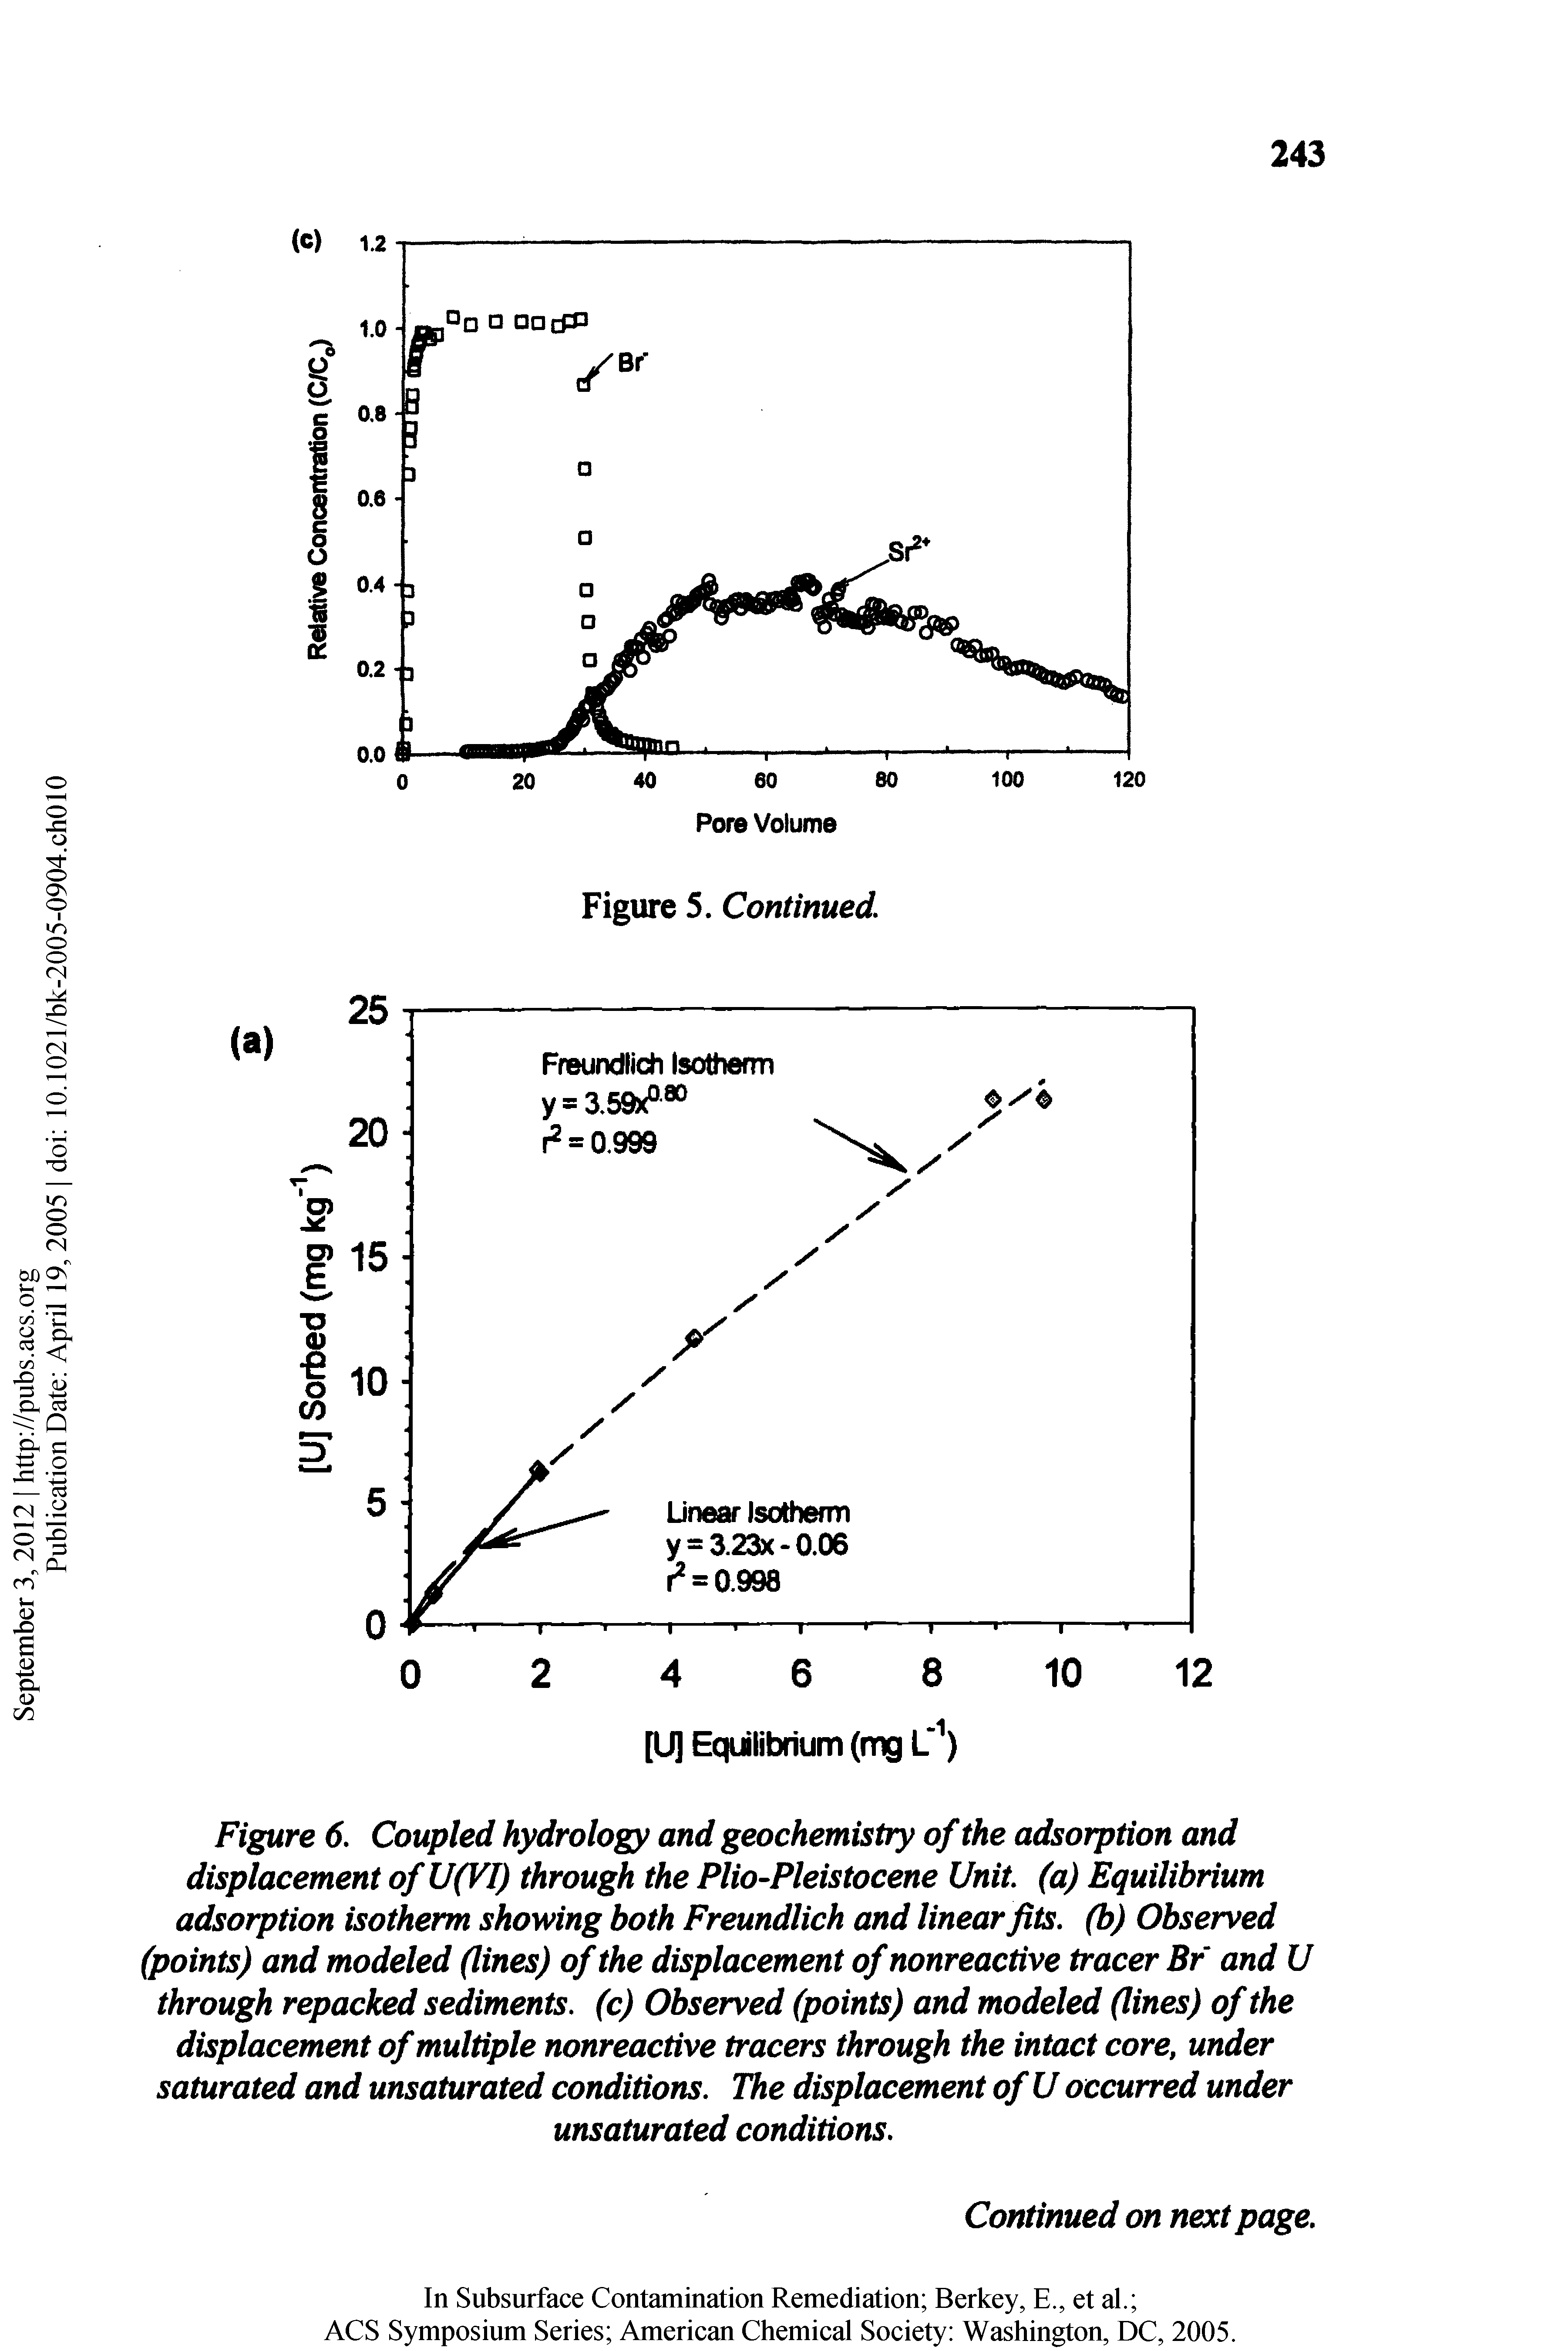 Figure 6. Coupled hydrology and geochemistry of the adsorption and displacement of U(VI) through the Plio-Pleistocene Unit, (a) Equilibrium adsorption isotherm showing both Freundlich and linear fits, (b) Observed (points) and modeled (lines) of the displacement of nonreactive tracer Br and U through repacked sediments, (c) Observed (points) and modeled (lines) of the displacement of multiple nonreactive tracers through the intact core, under saturated and unsaturated conditions. The displacement of U occurred under...